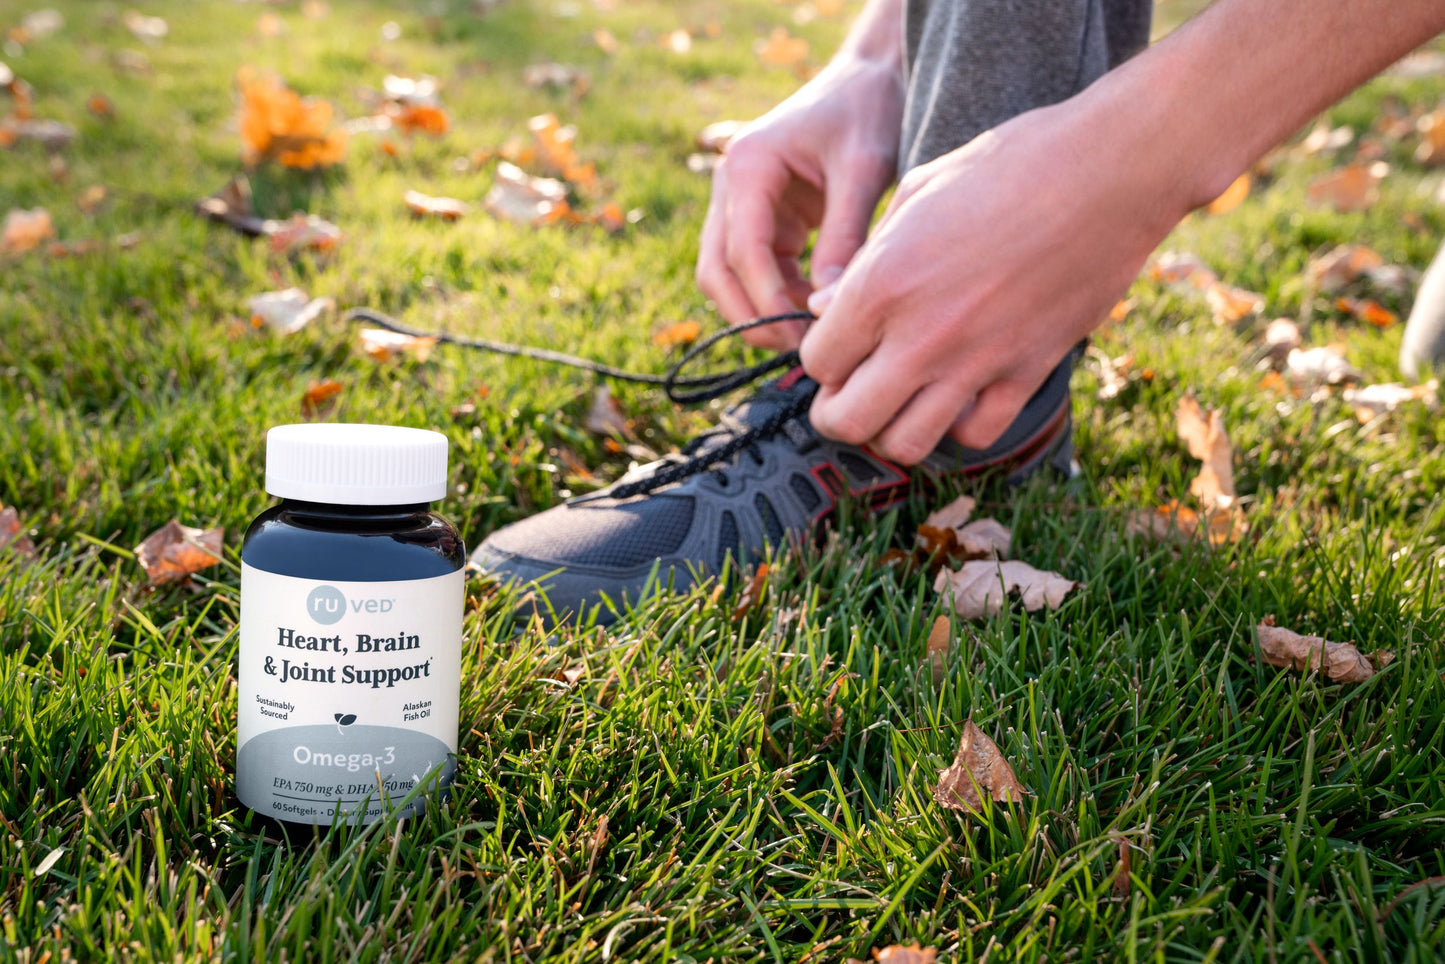 An Omega-3 bottle sitting on grass next to a person tying their shoes.